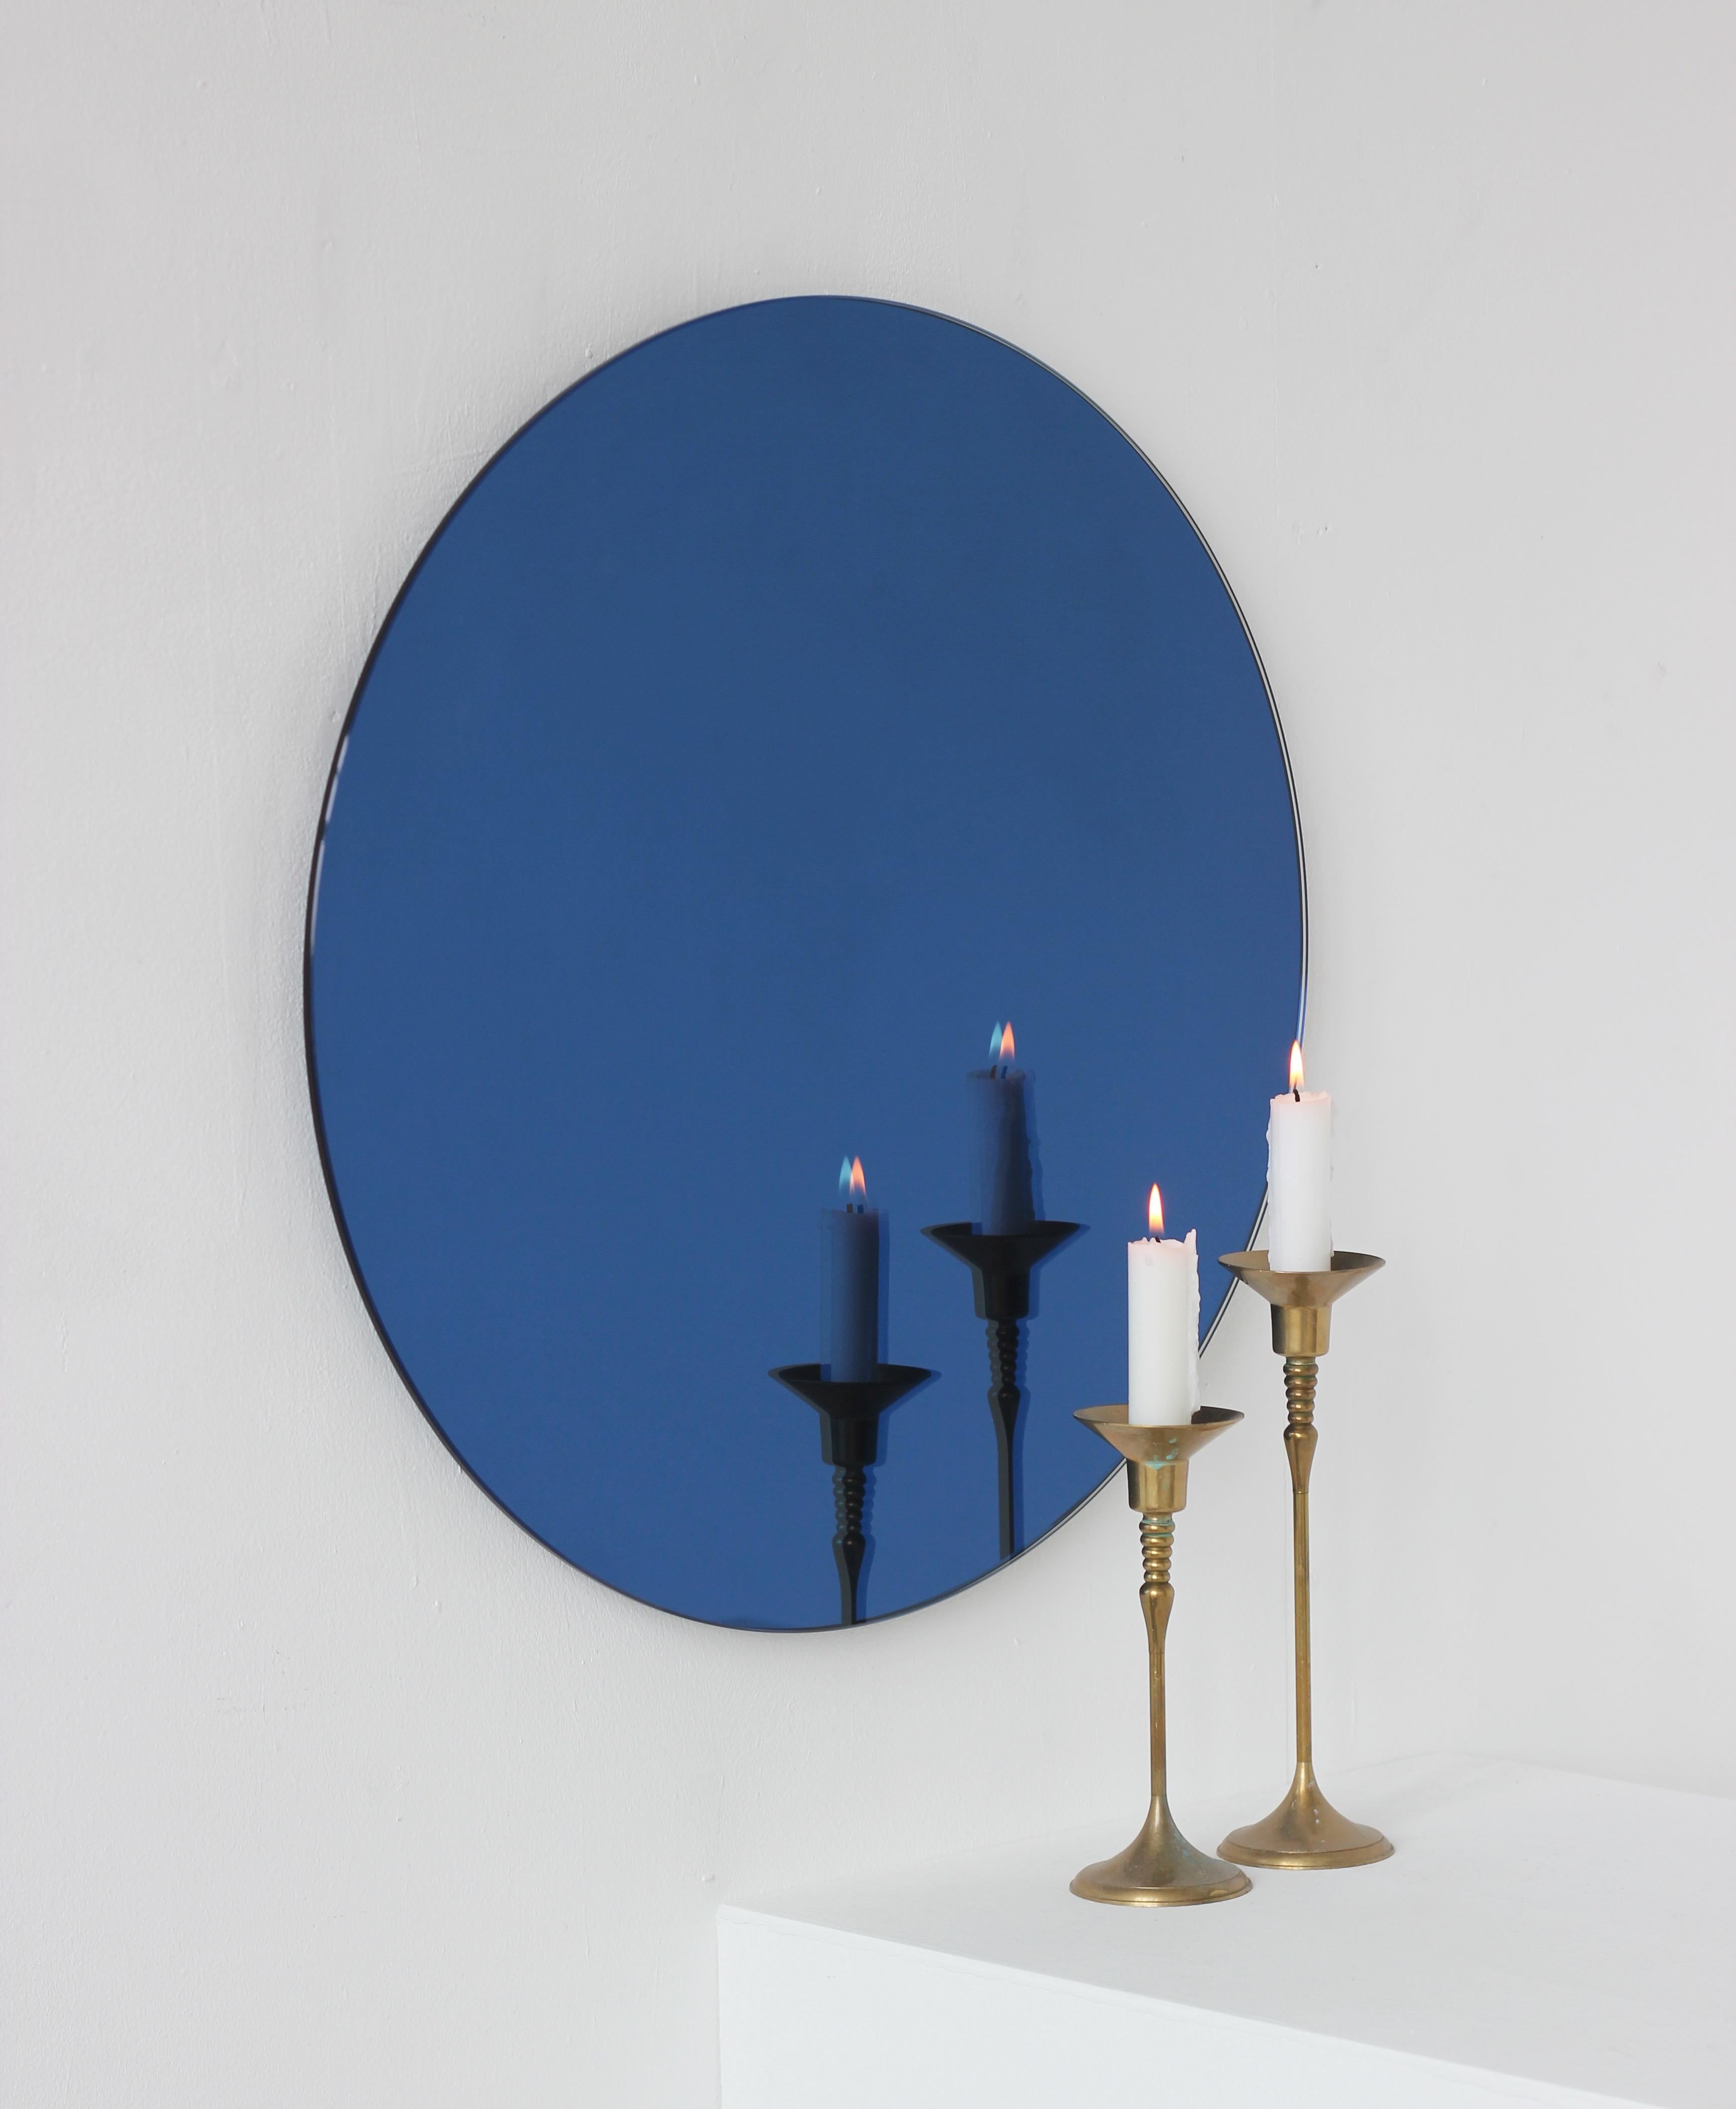 Orbis Blue Tinted Round Contemporary Frameless Mirror, Medium In New Condition For Sale In London, GB